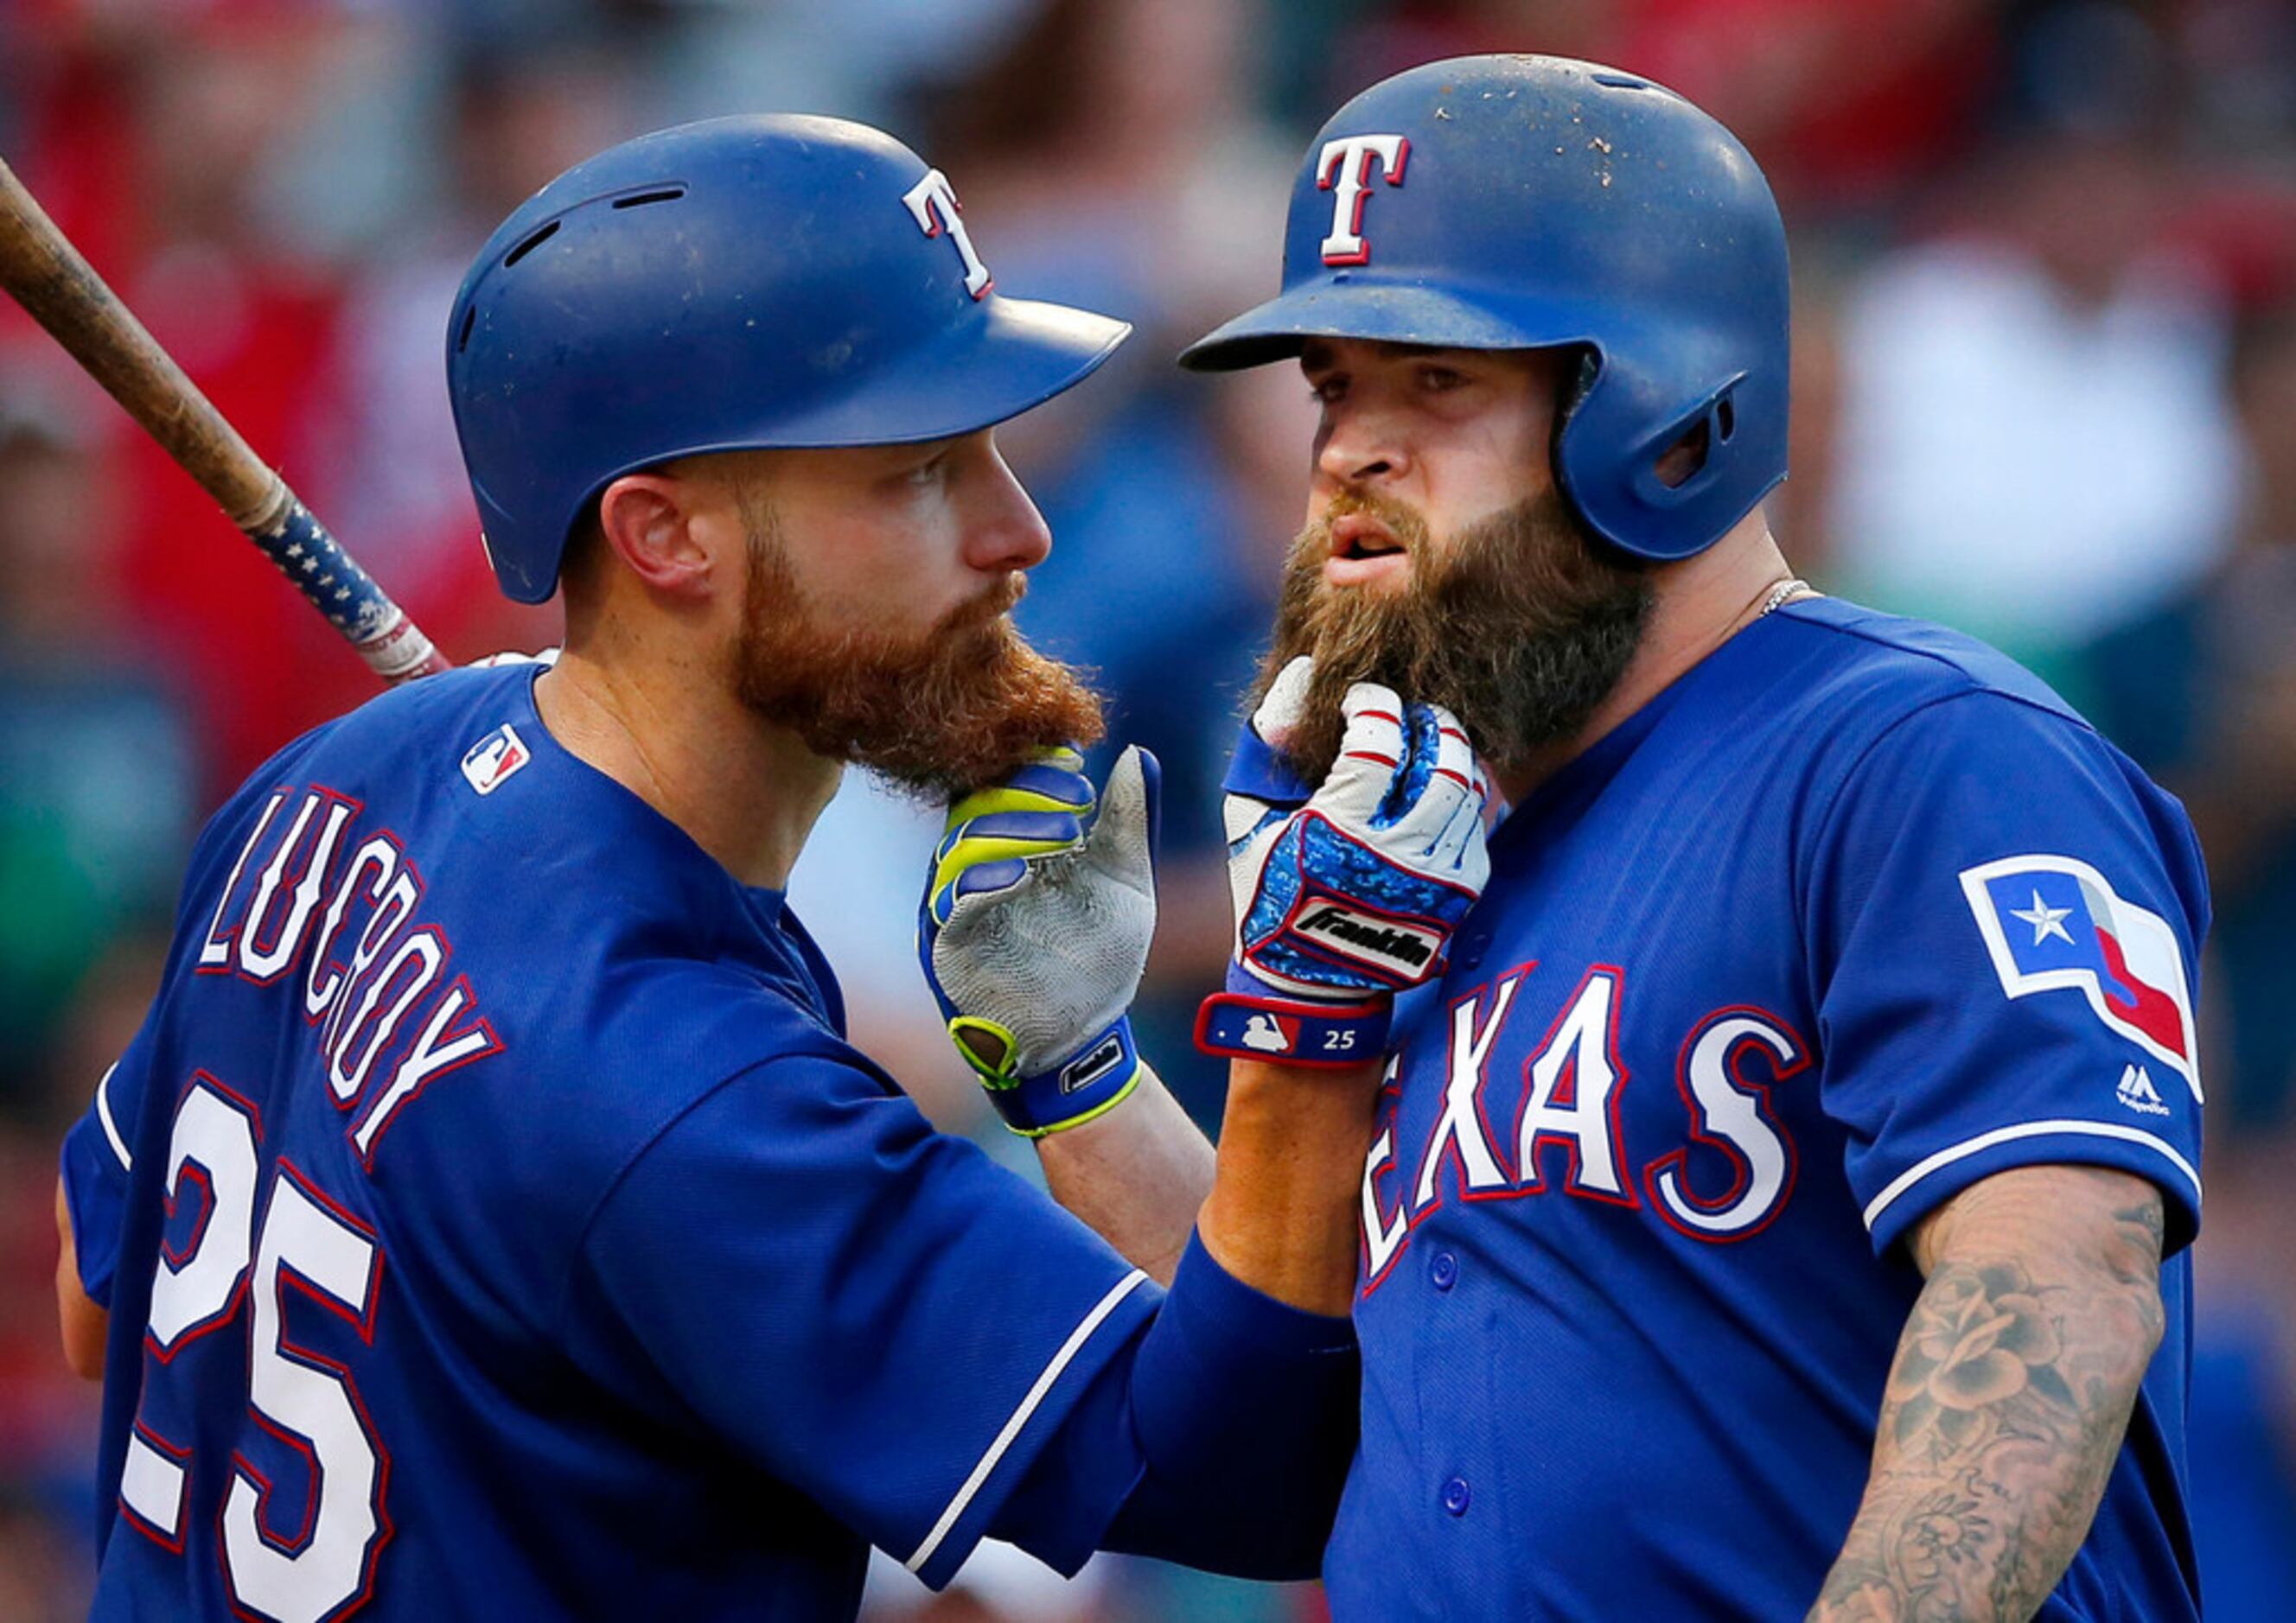 Report: Rangers sign Mike Napoli to one-year deal worth $8.5 million